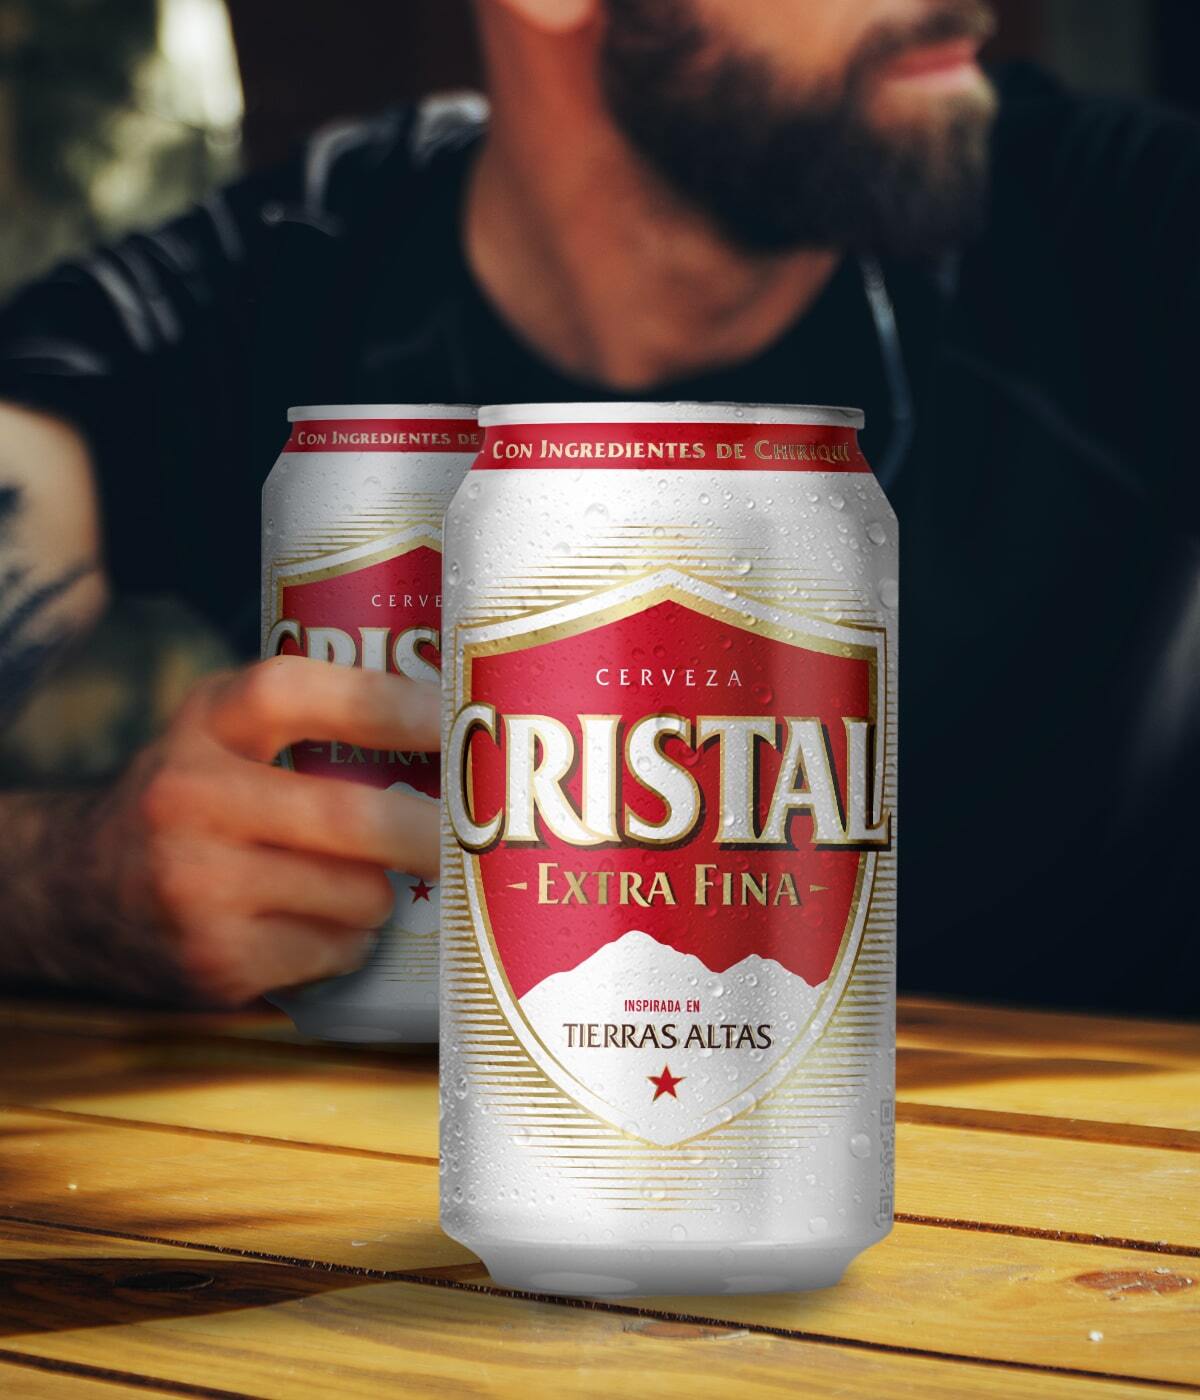 Imaginity, Cristal, Beer, Packaging Design, Can